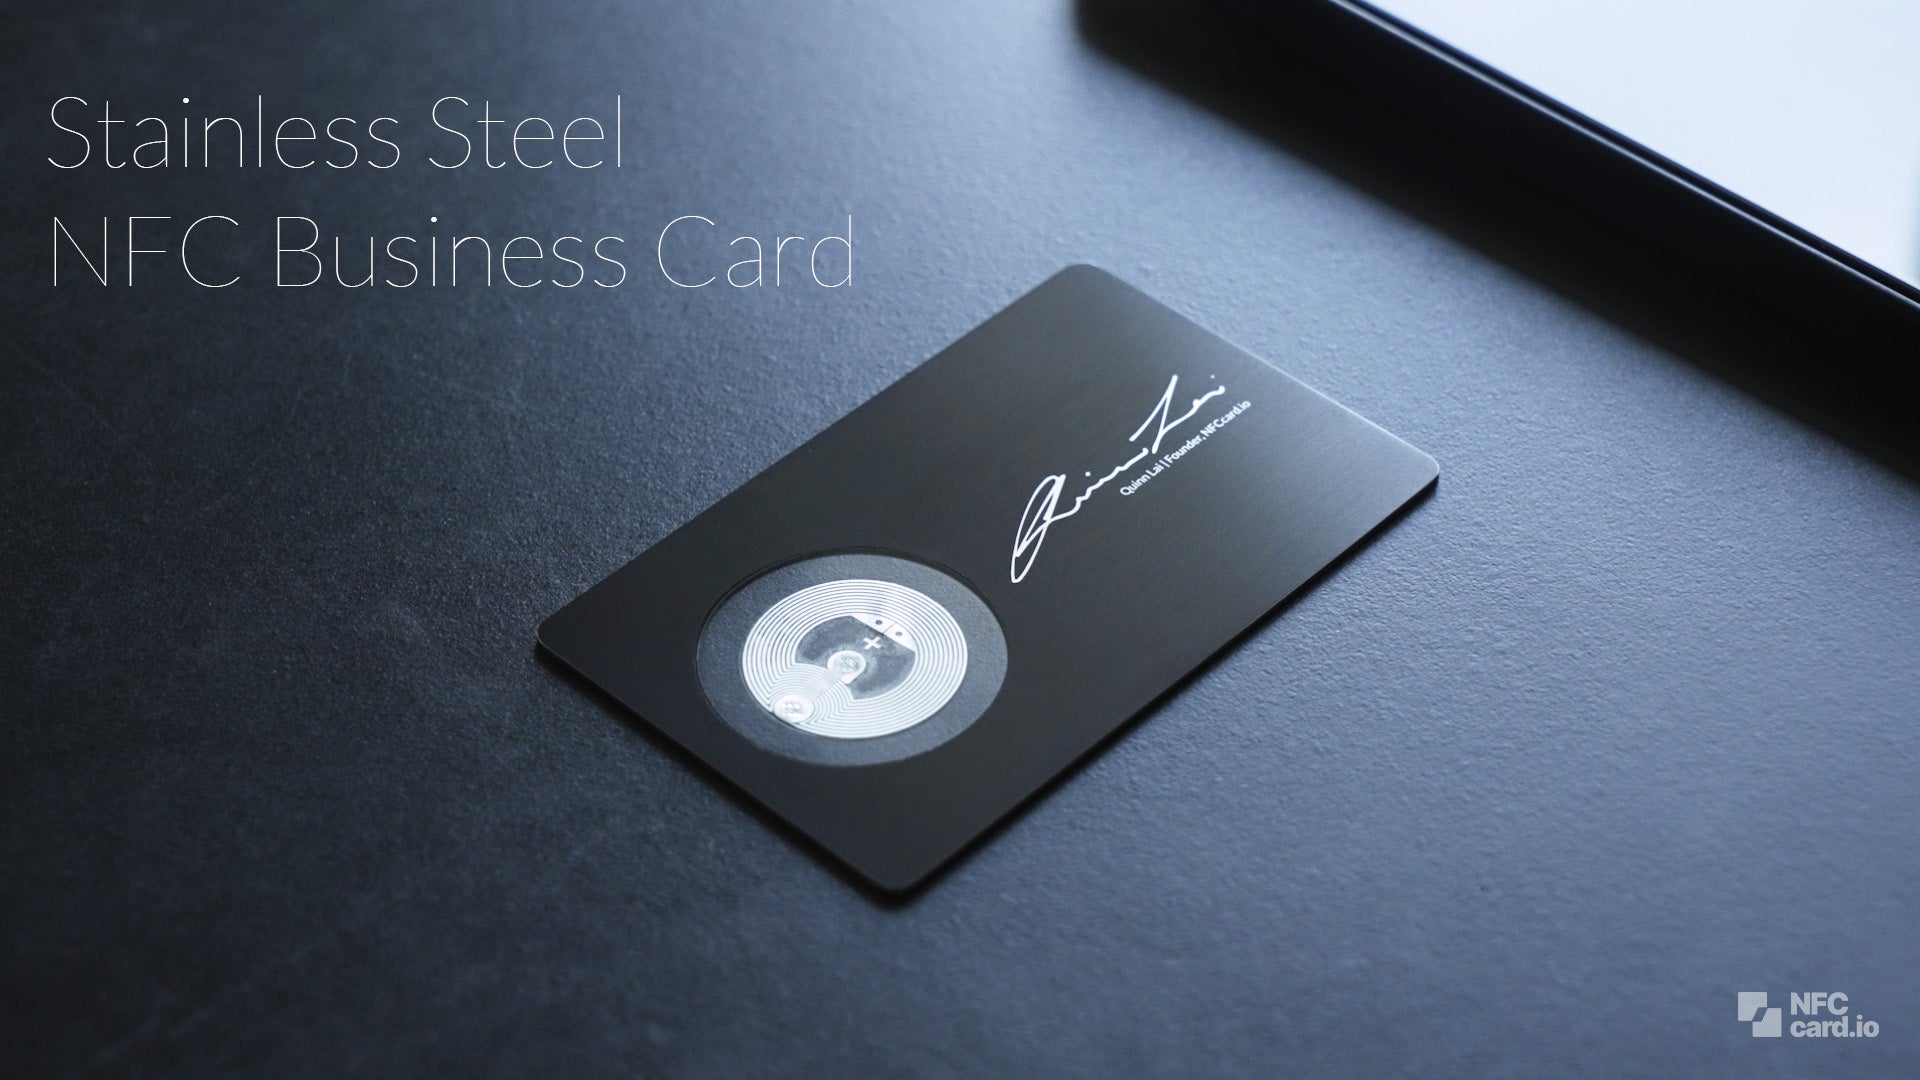 Load video: Metal NFC business card with premium craftsmanship